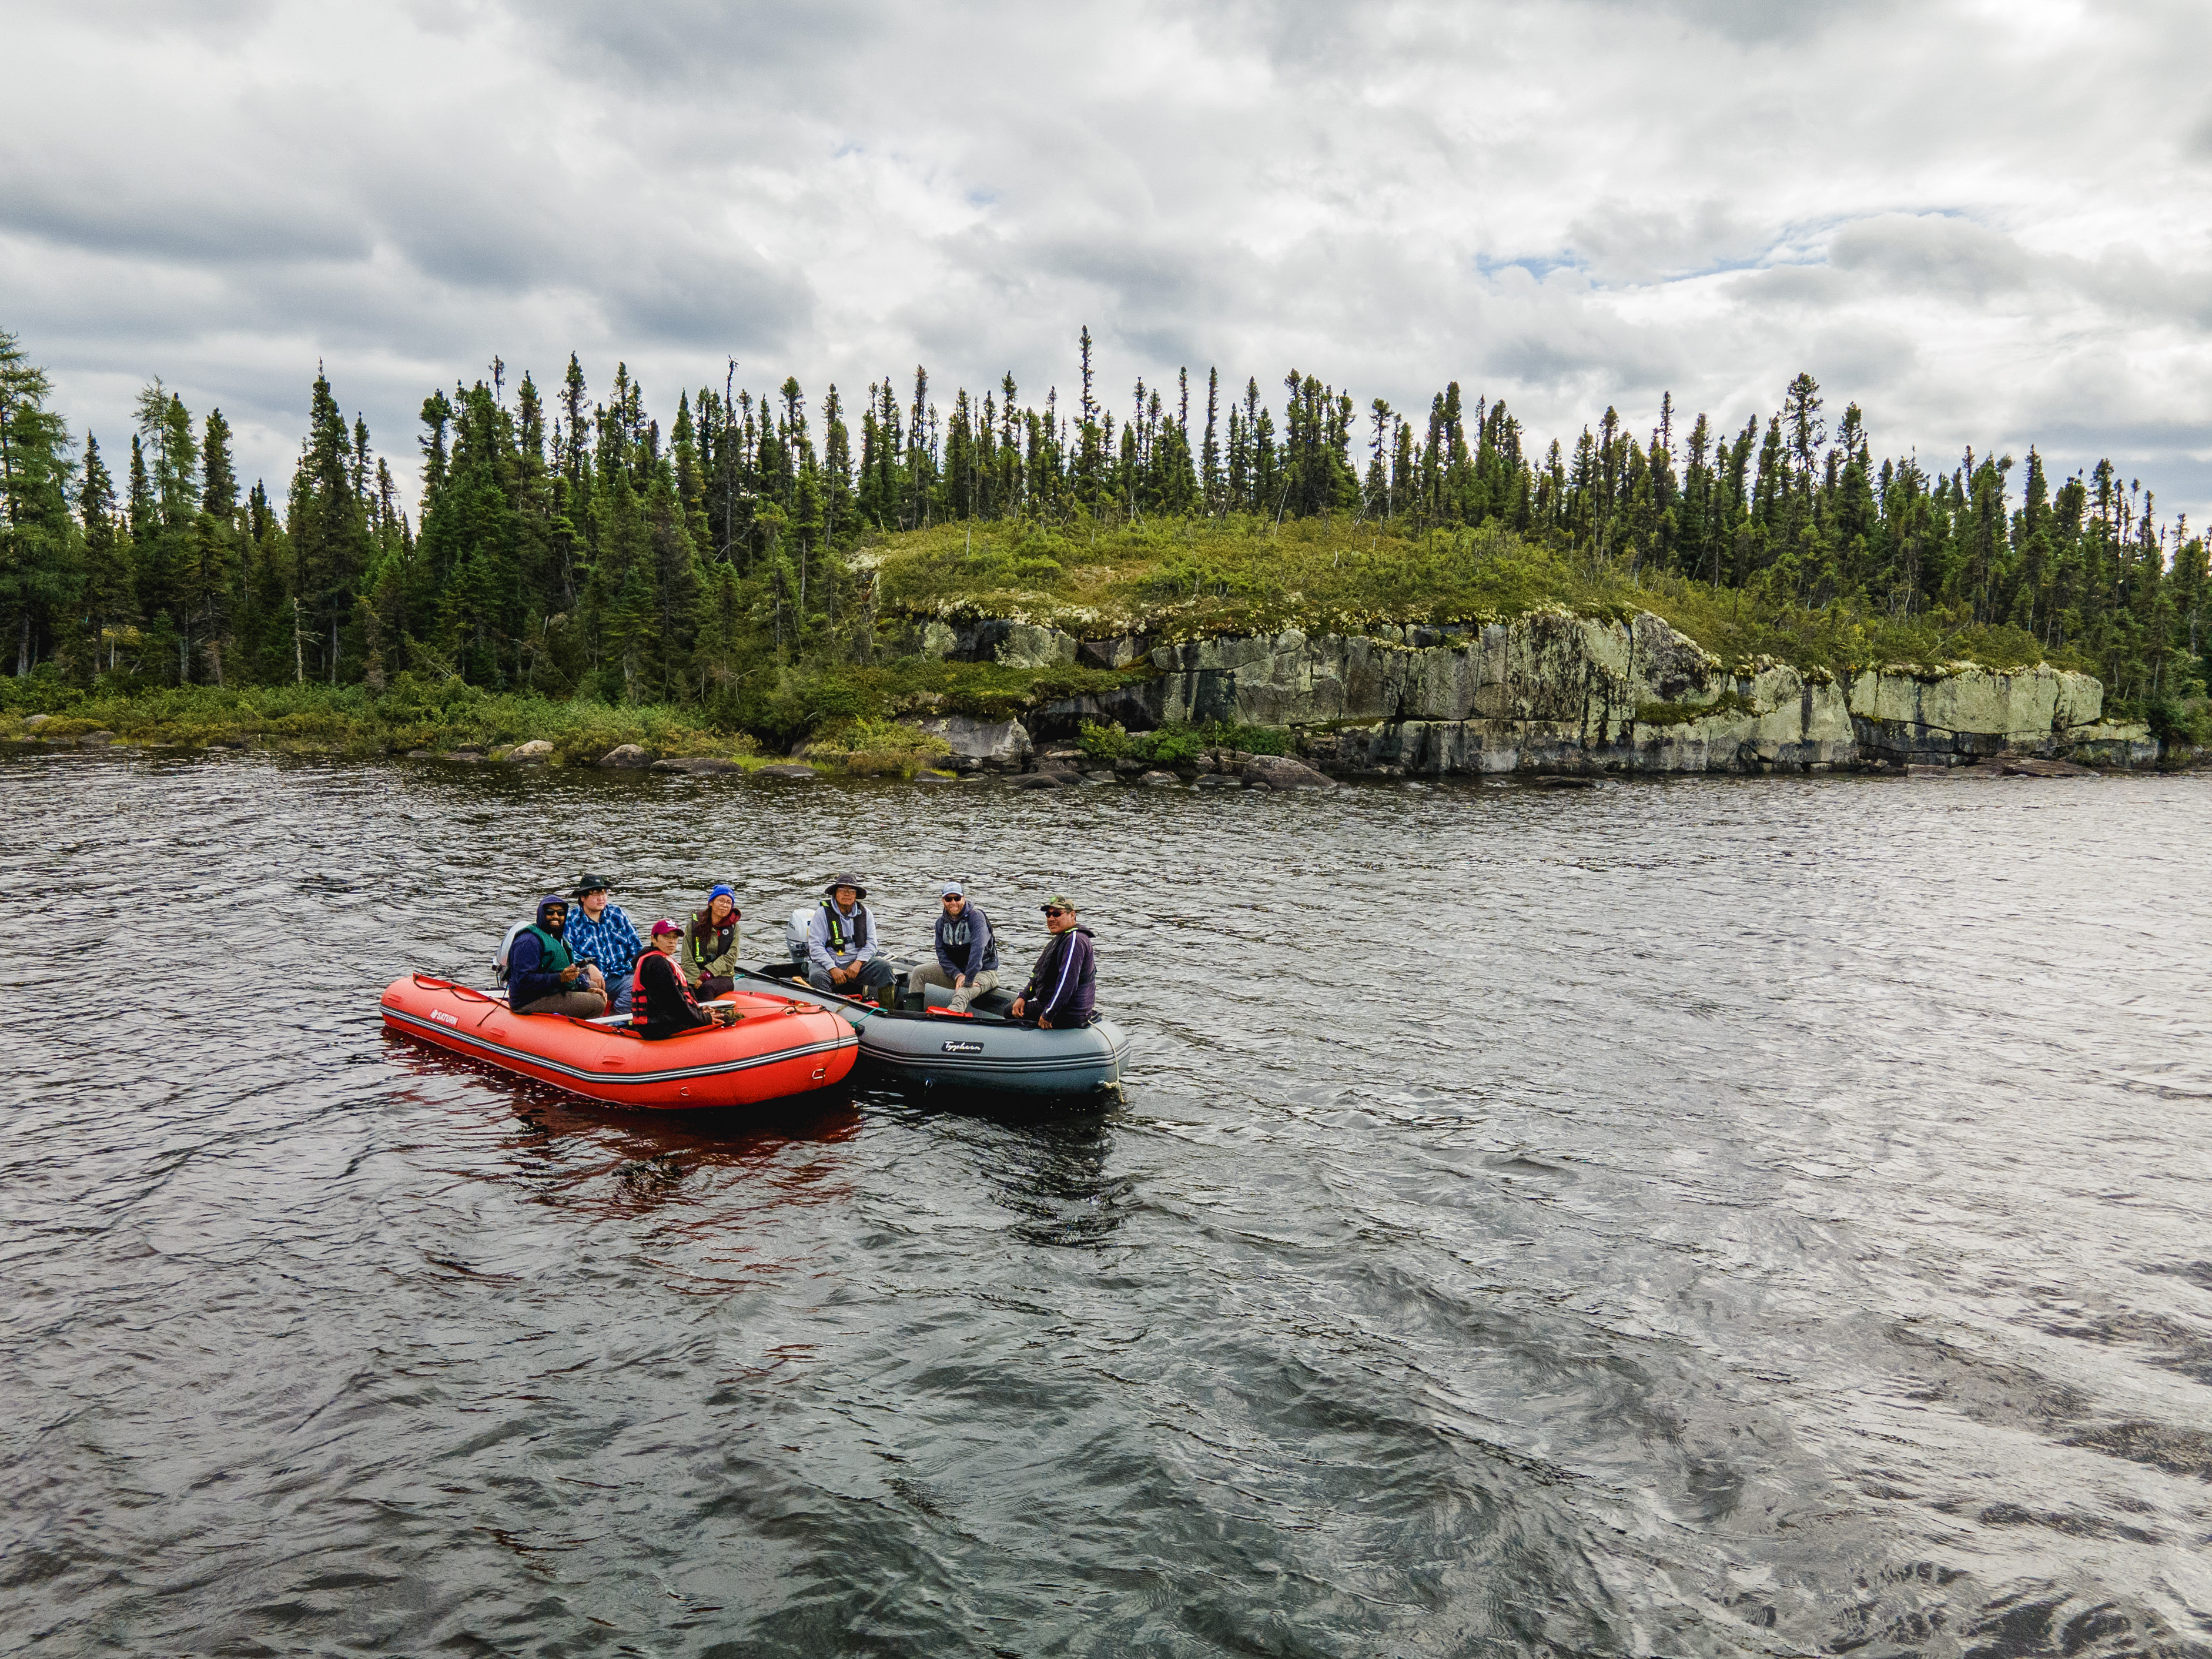 On the land and water experiential learning opportunities for Water First participants at Park Lake in Labrador